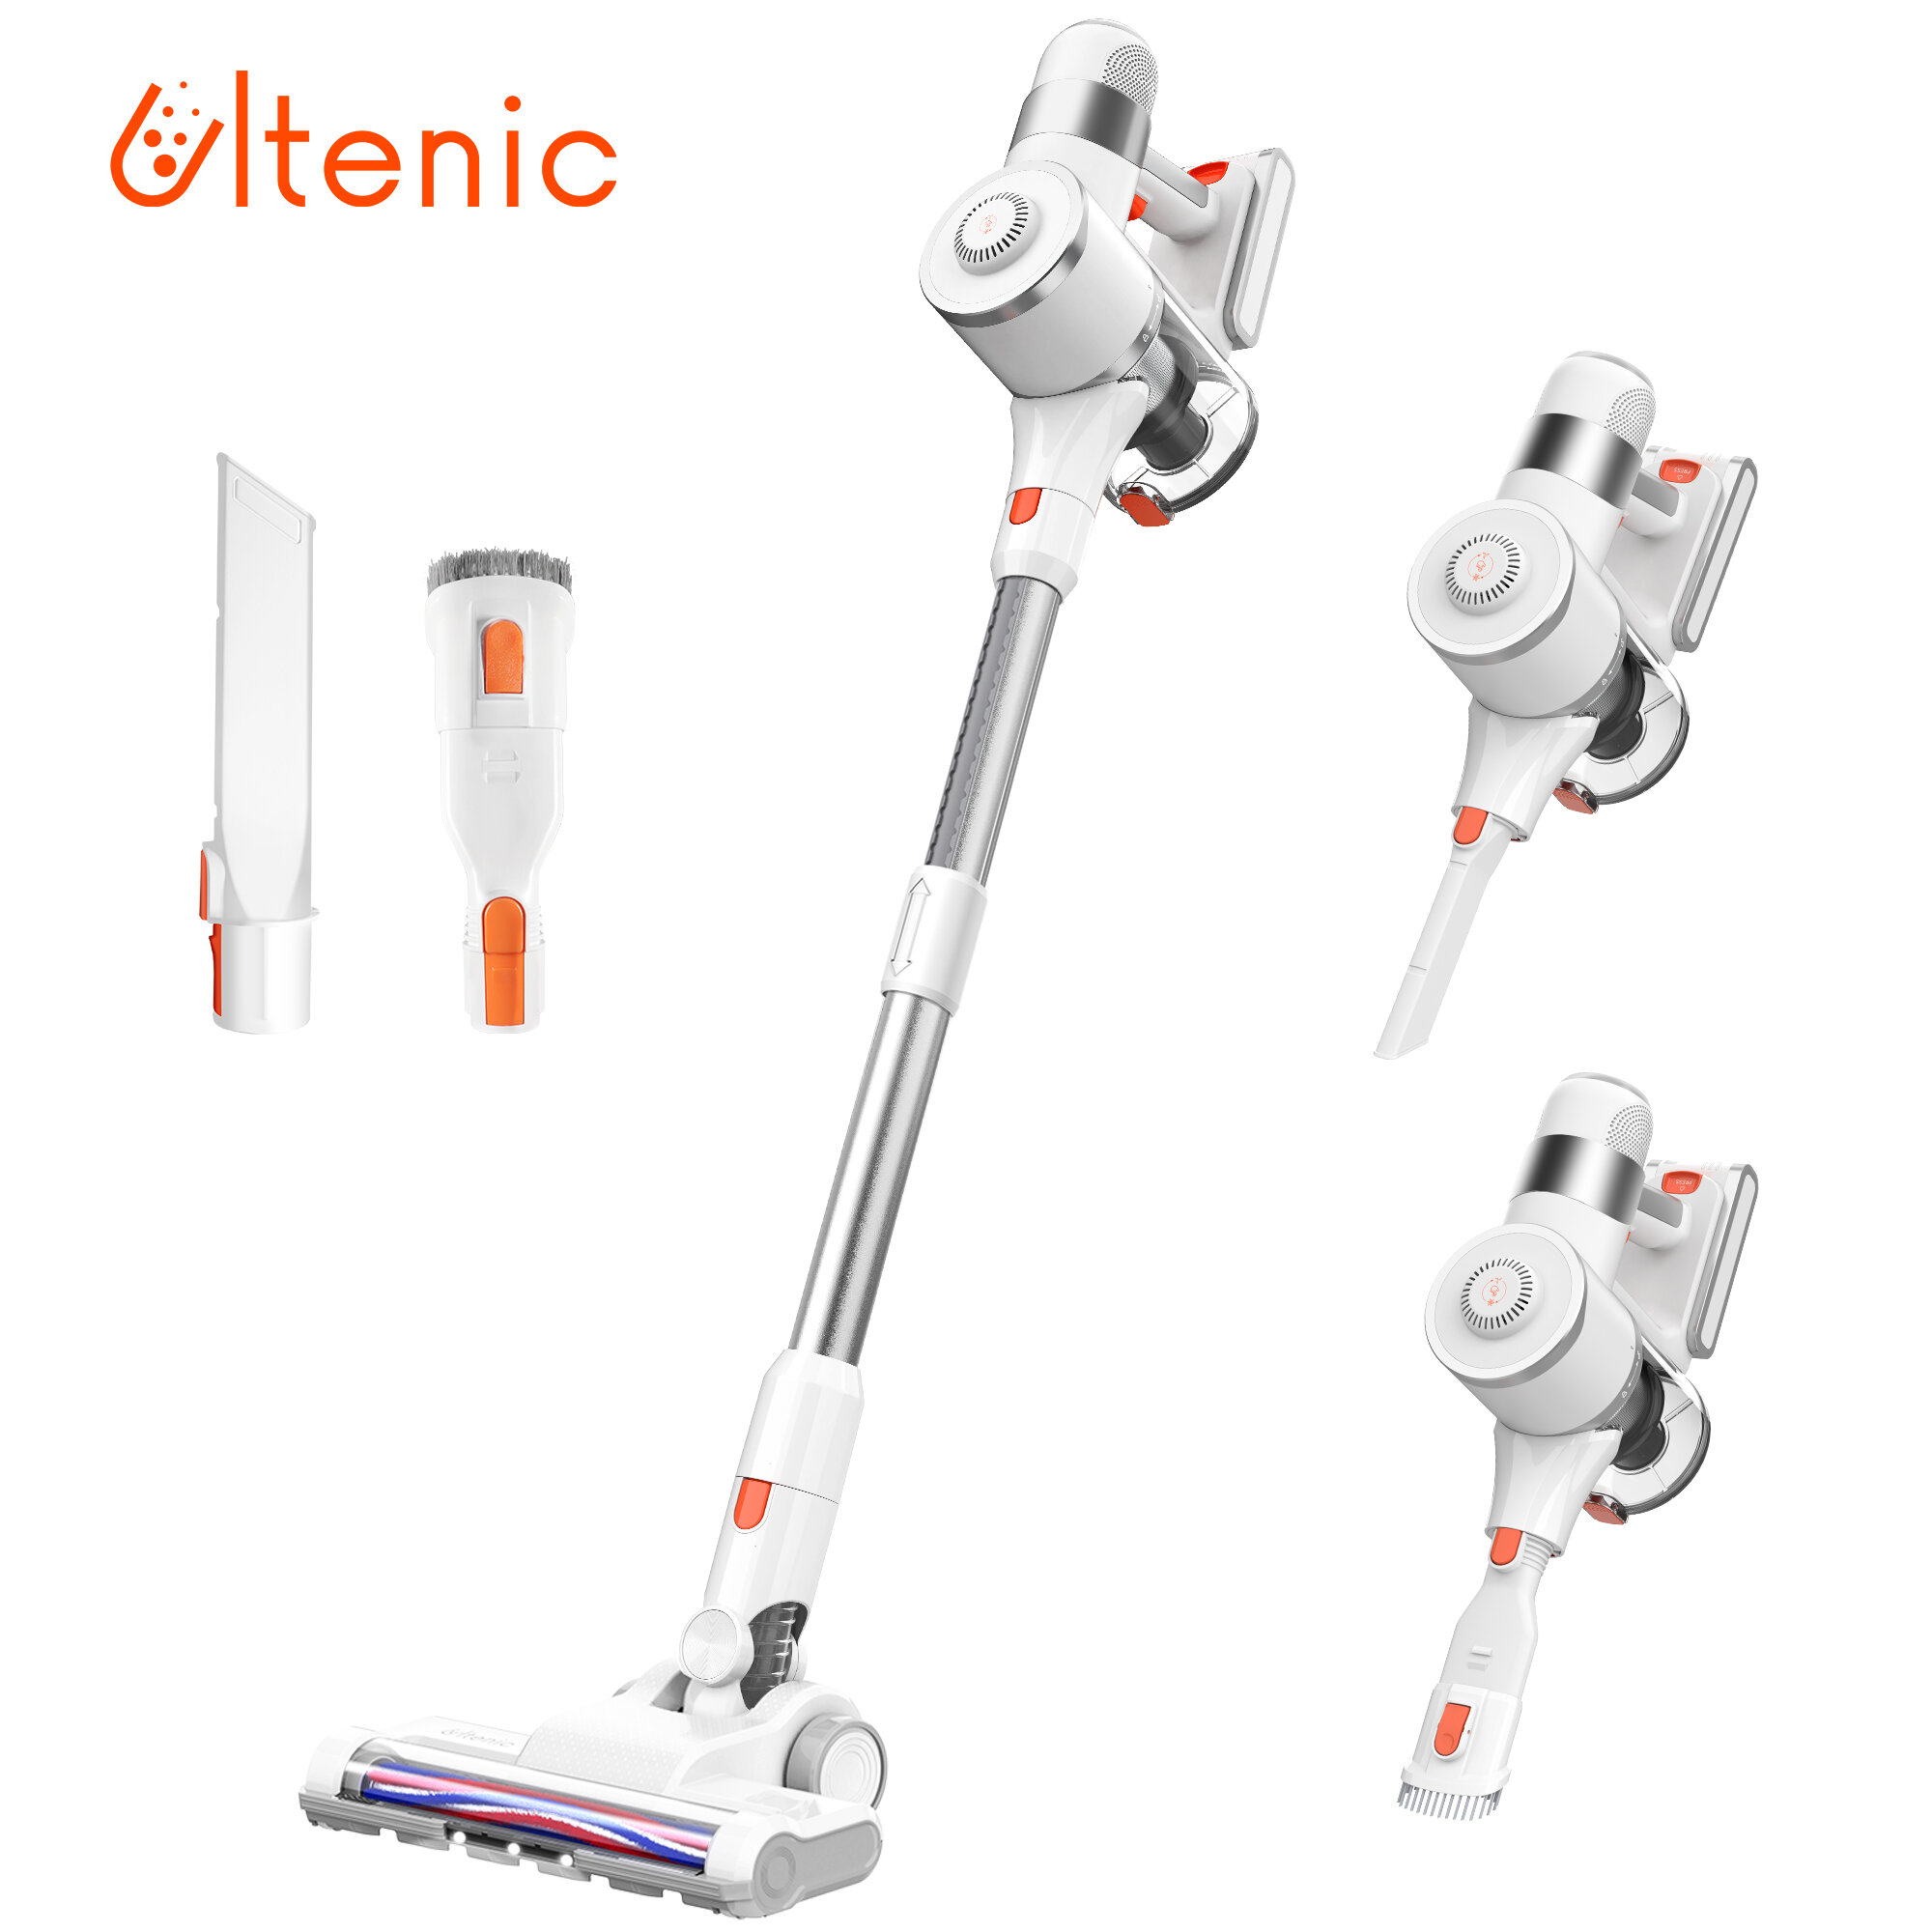 [EU Direct] Ultenic U10 Pro Cordless Vacuum Cleaner 5-in-1 Handheld Vac for Hard Floors,Carpets,Area Rugs and Pet Hair